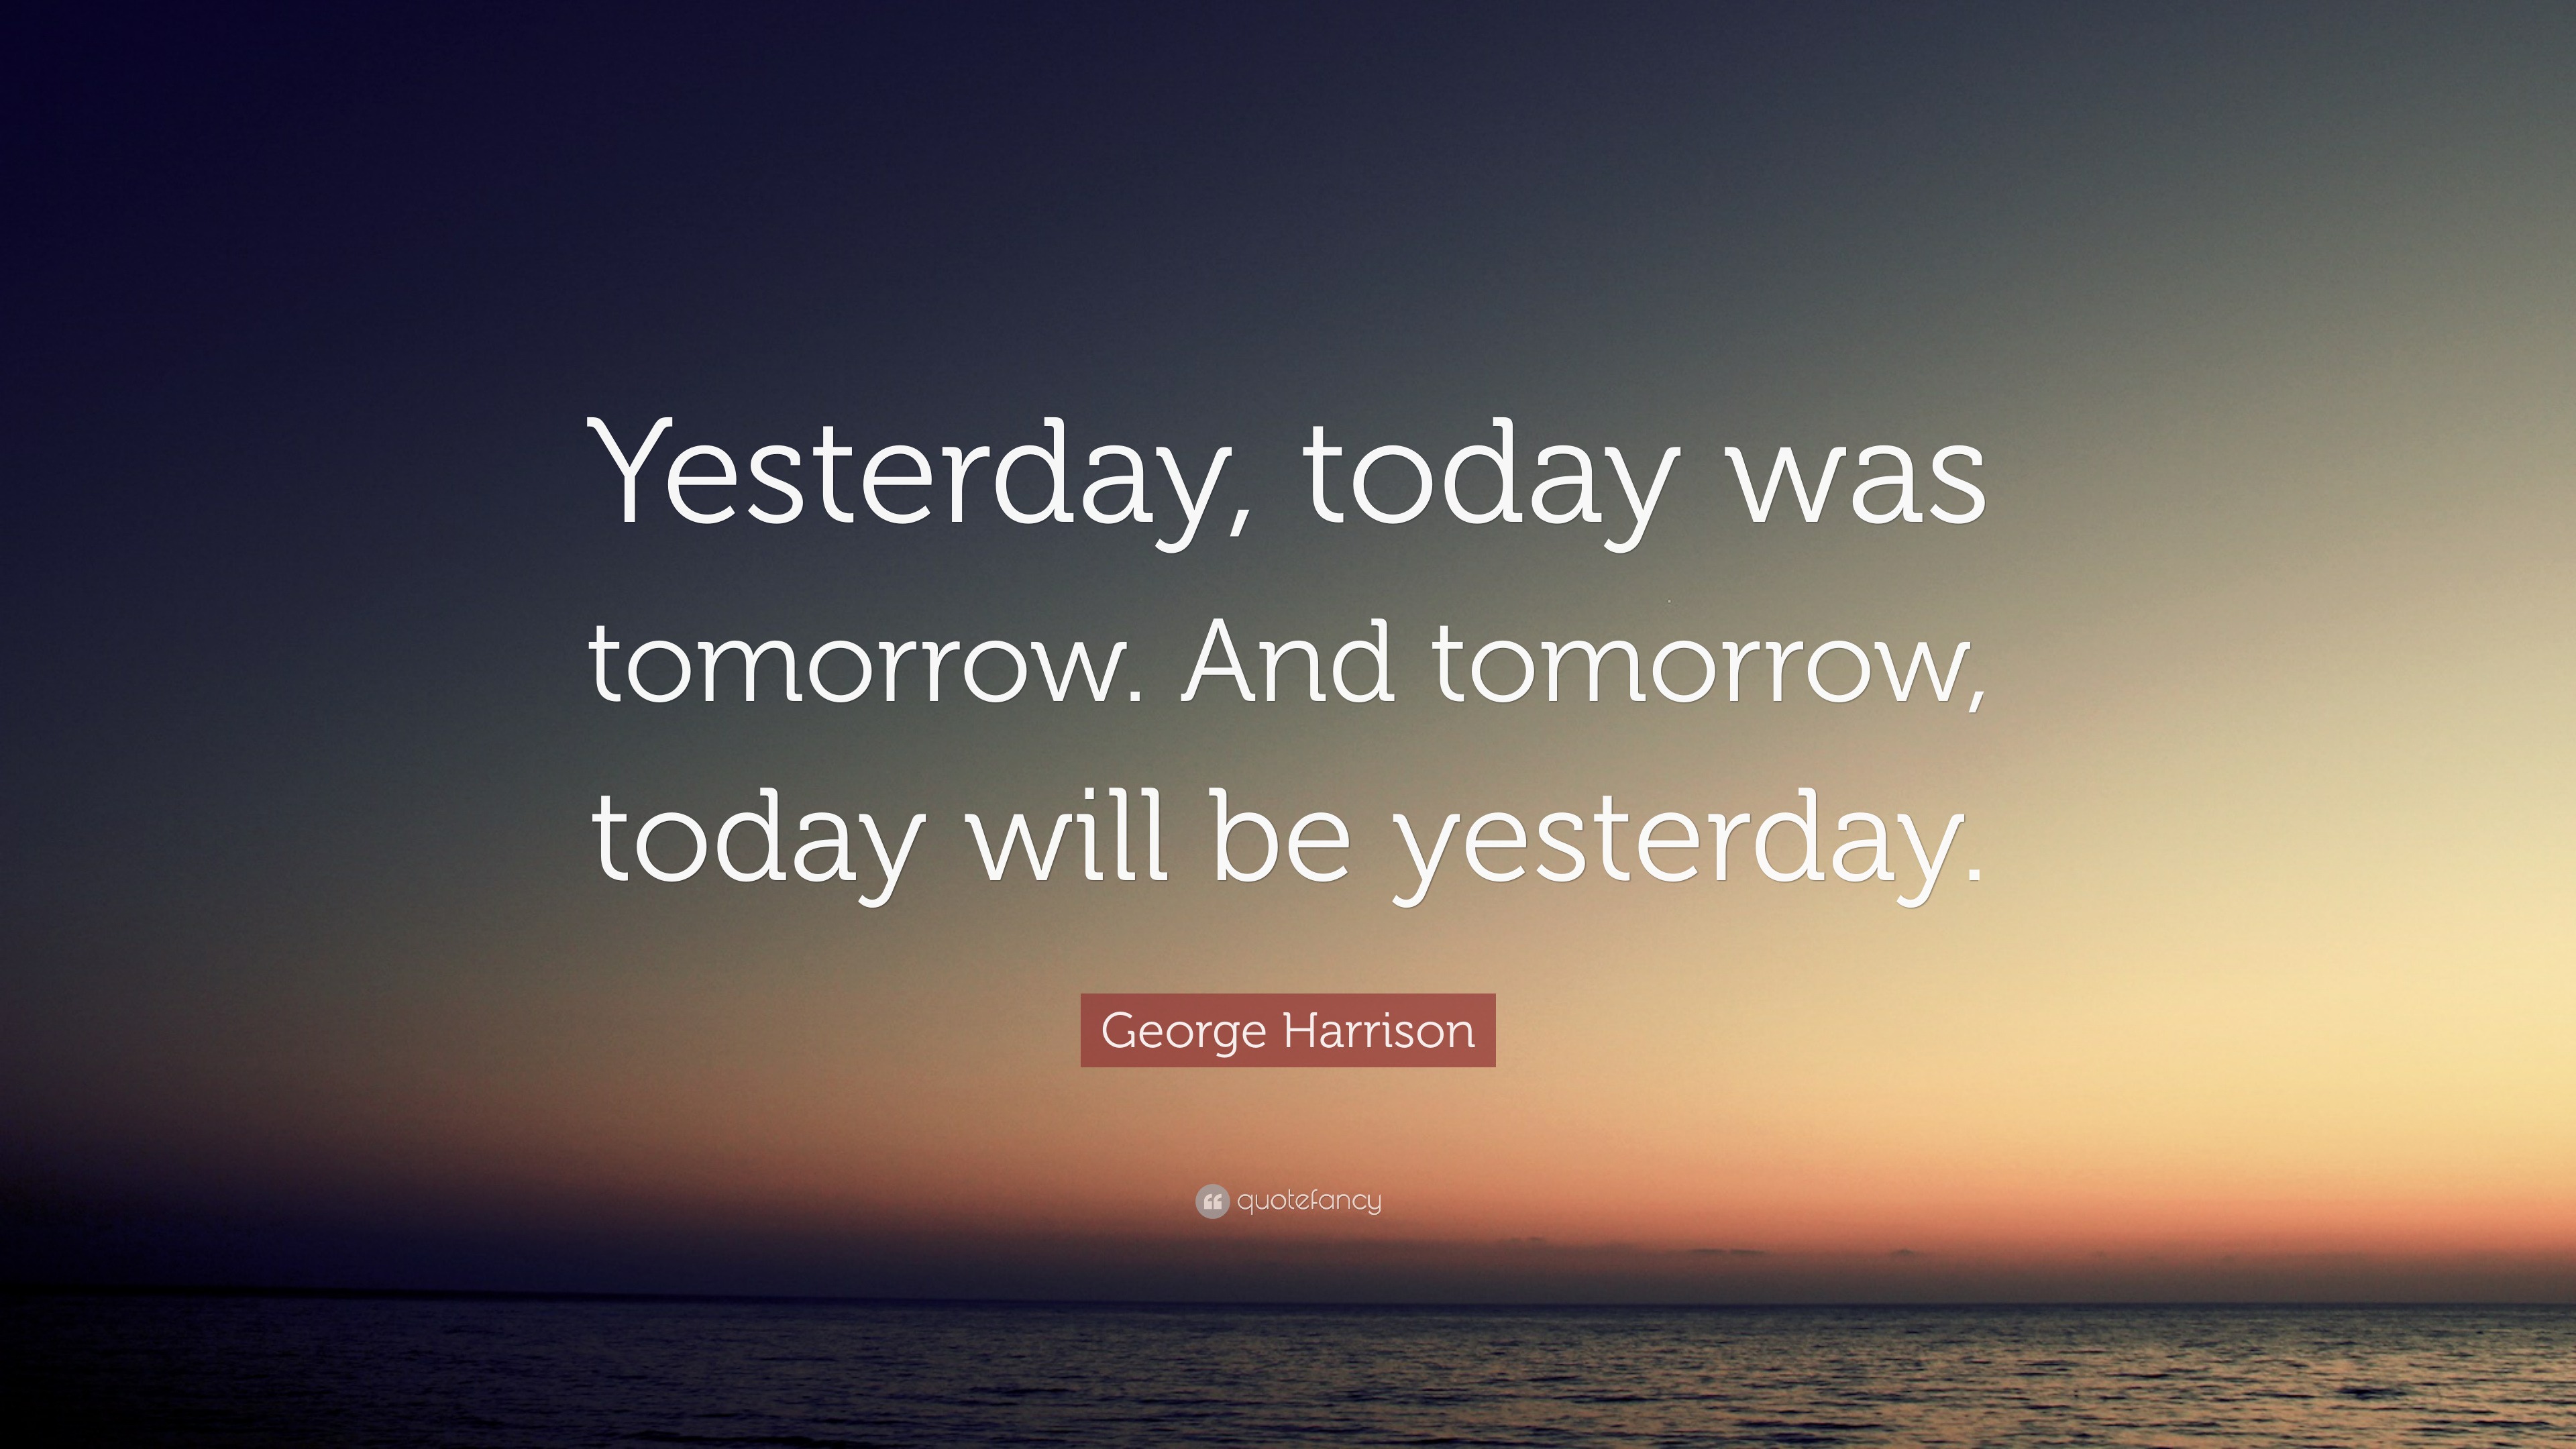 https://quotefancy.com/media/wallpaper/3840x2160/2501493-George-Harrison-Quote-Yesterday-today-was-tomorrow-And-tomorrow.jpg